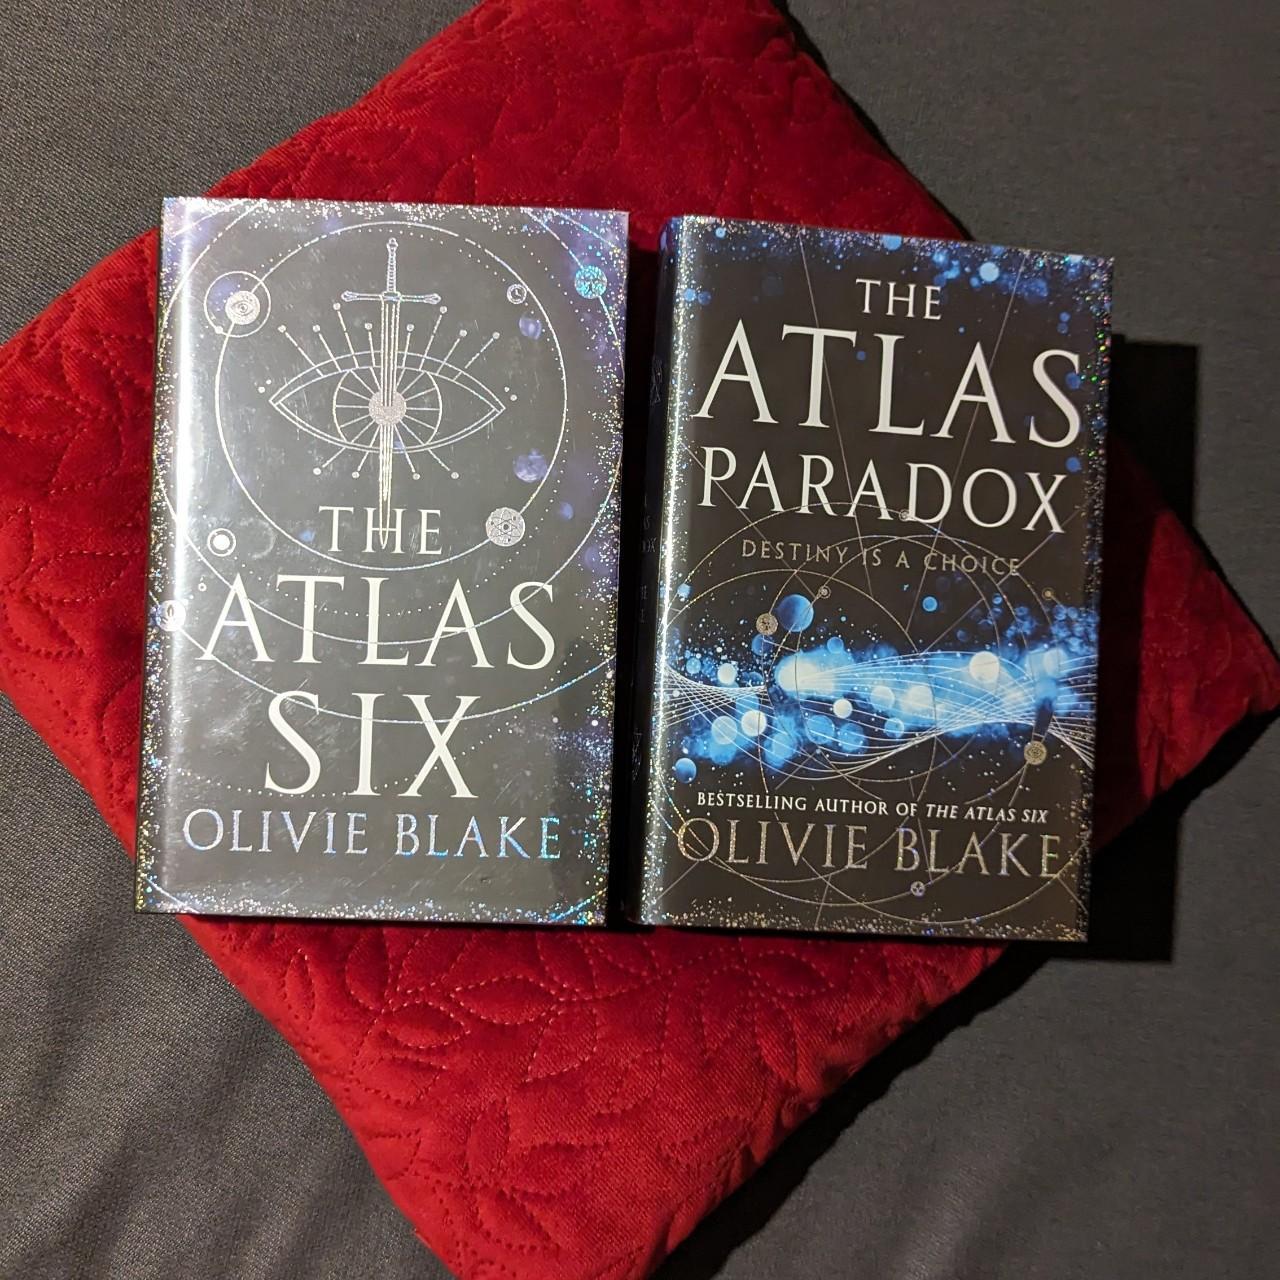 Illumicrate Exclusive: The Atlas Paradox by Olivie Blake - Illumicrate